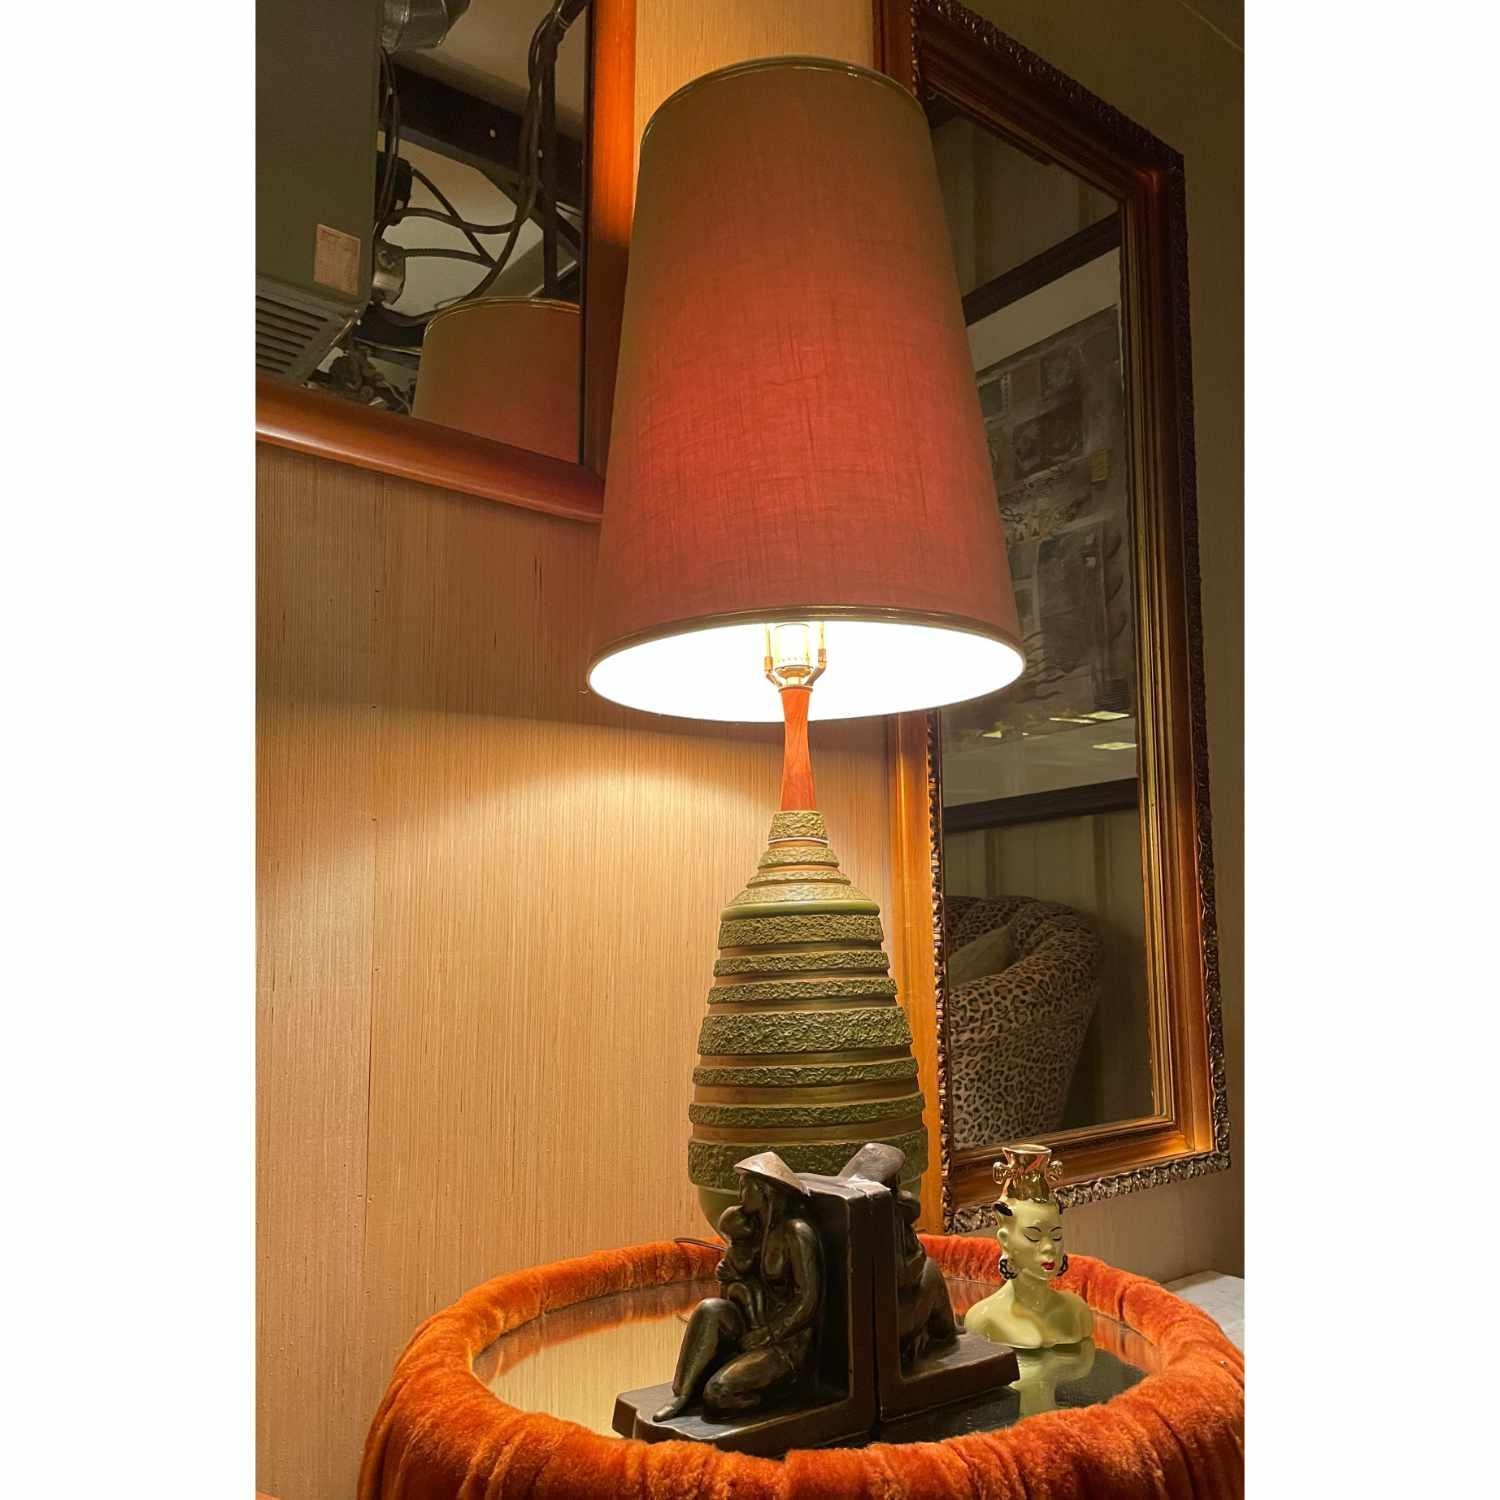 Mid-Century Modern Avacado Green and Gold Plasto Lamps with Original Shades In Good Condition For Sale In Chattanooga, TN